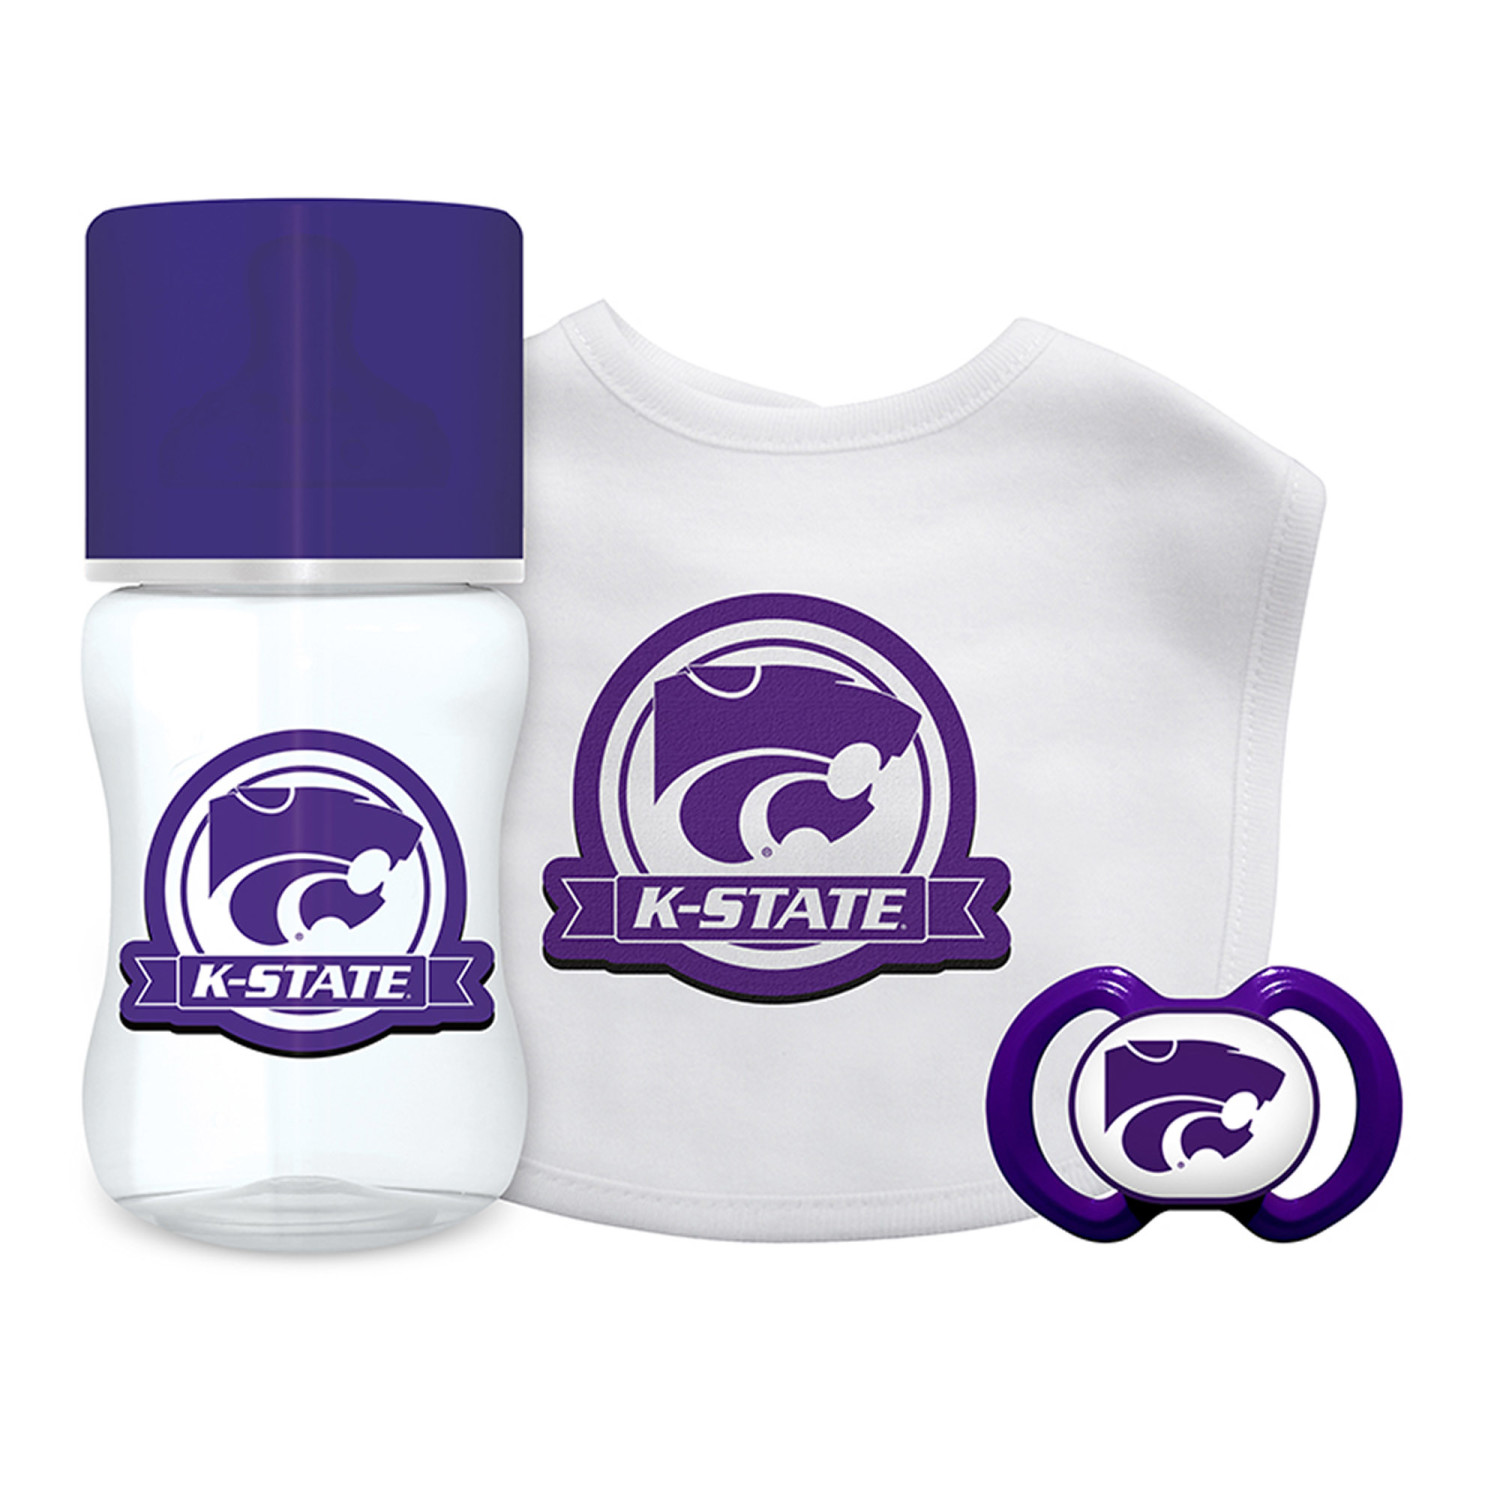 BabyFanatic Officially Licensed 3 Piece Unisex Gift Set - NCAA Kansas State Wildcats - image 2 of 4